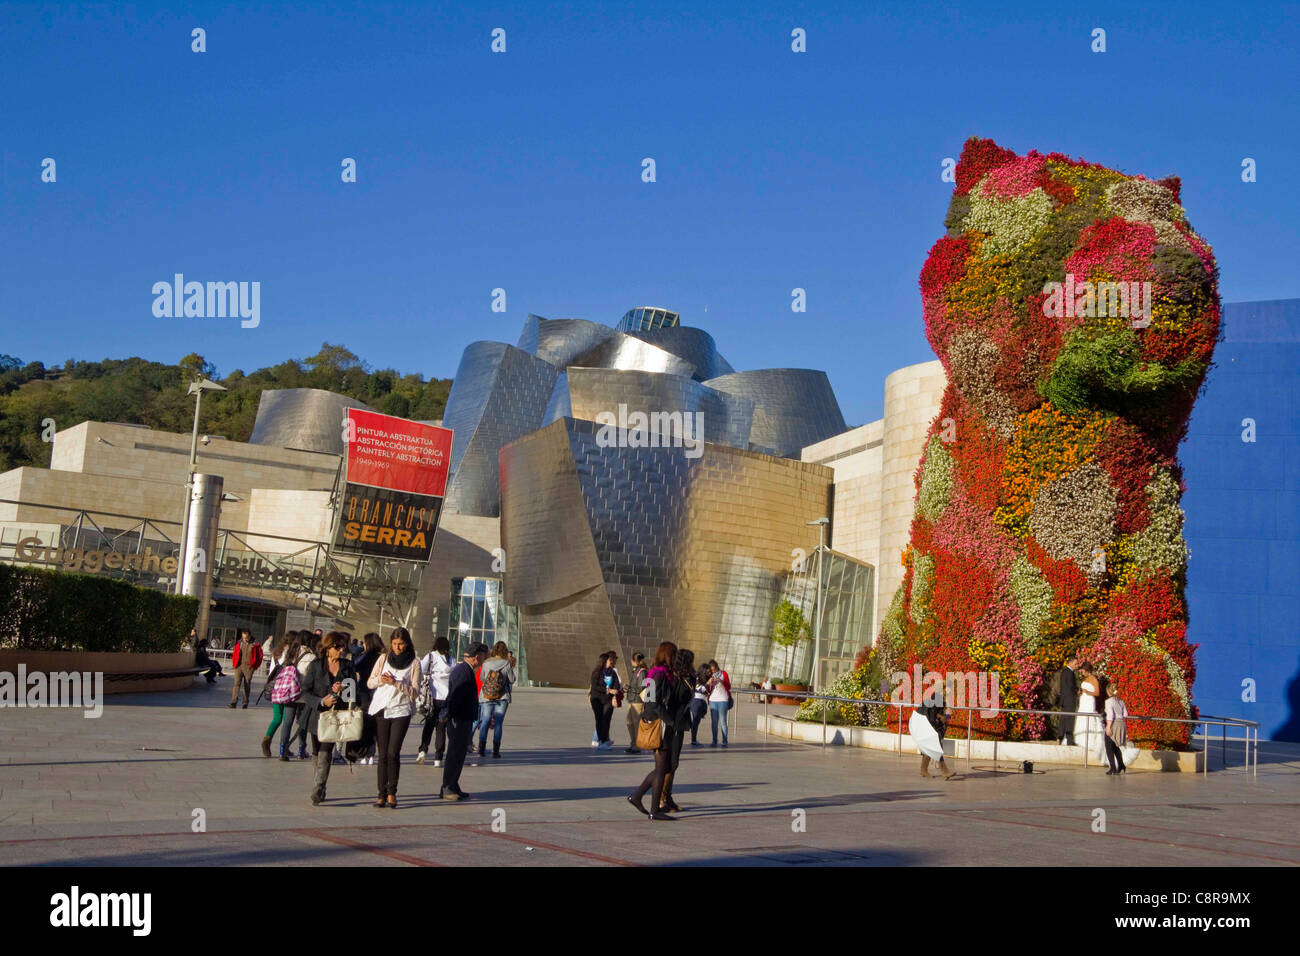 Topiary sculpture "Puppy" outside the Guggenheim Museum, Bilbao Stock Photo